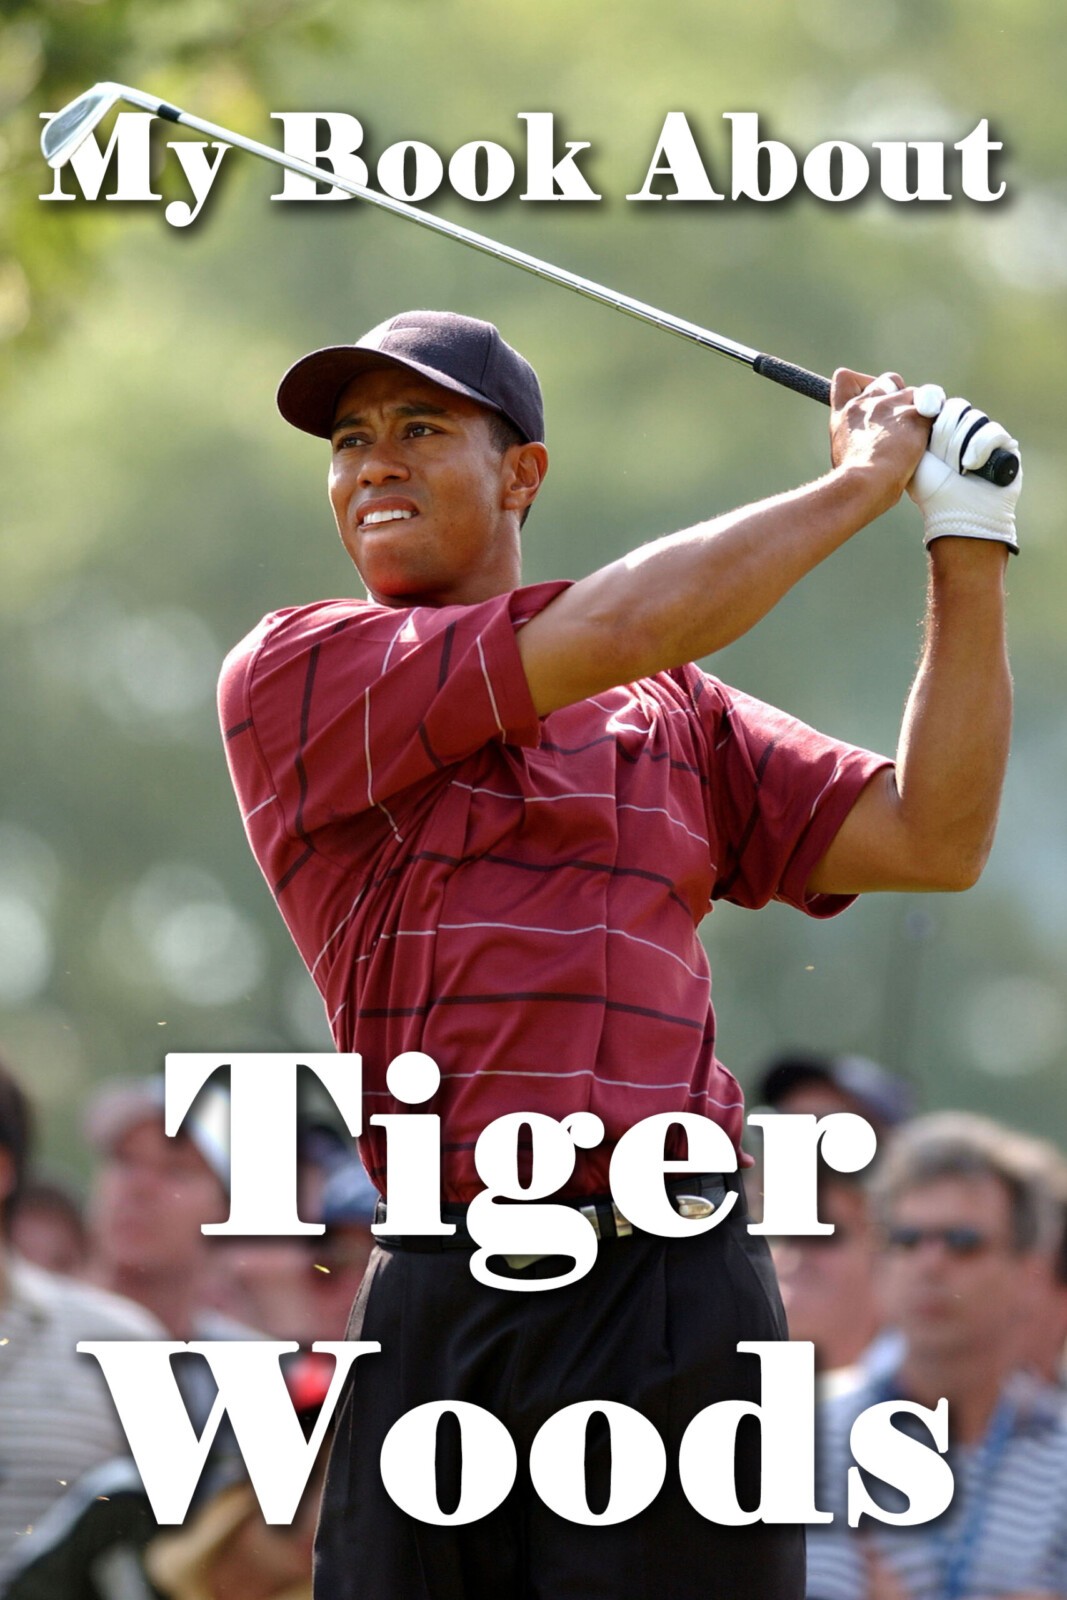 My Book About Tiger Woods (cover)